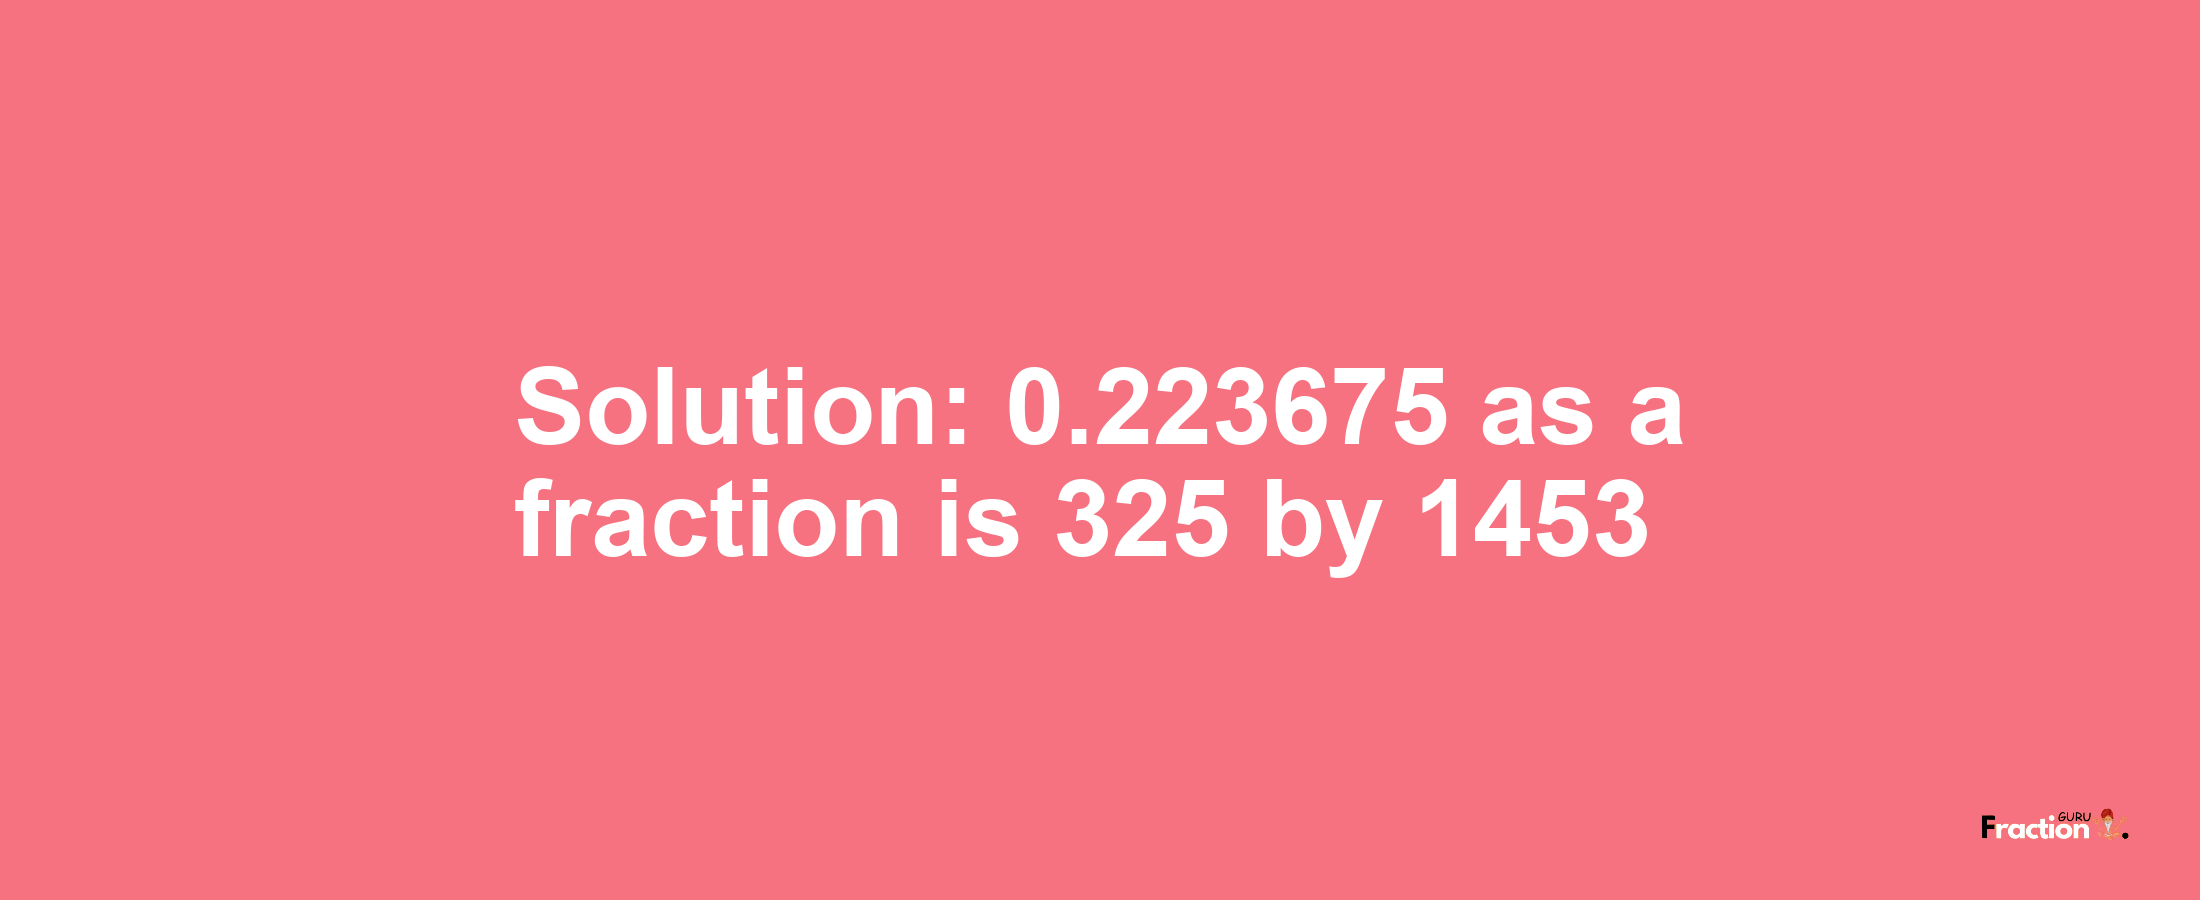 Solution:0.223675 as a fraction is 325/1453